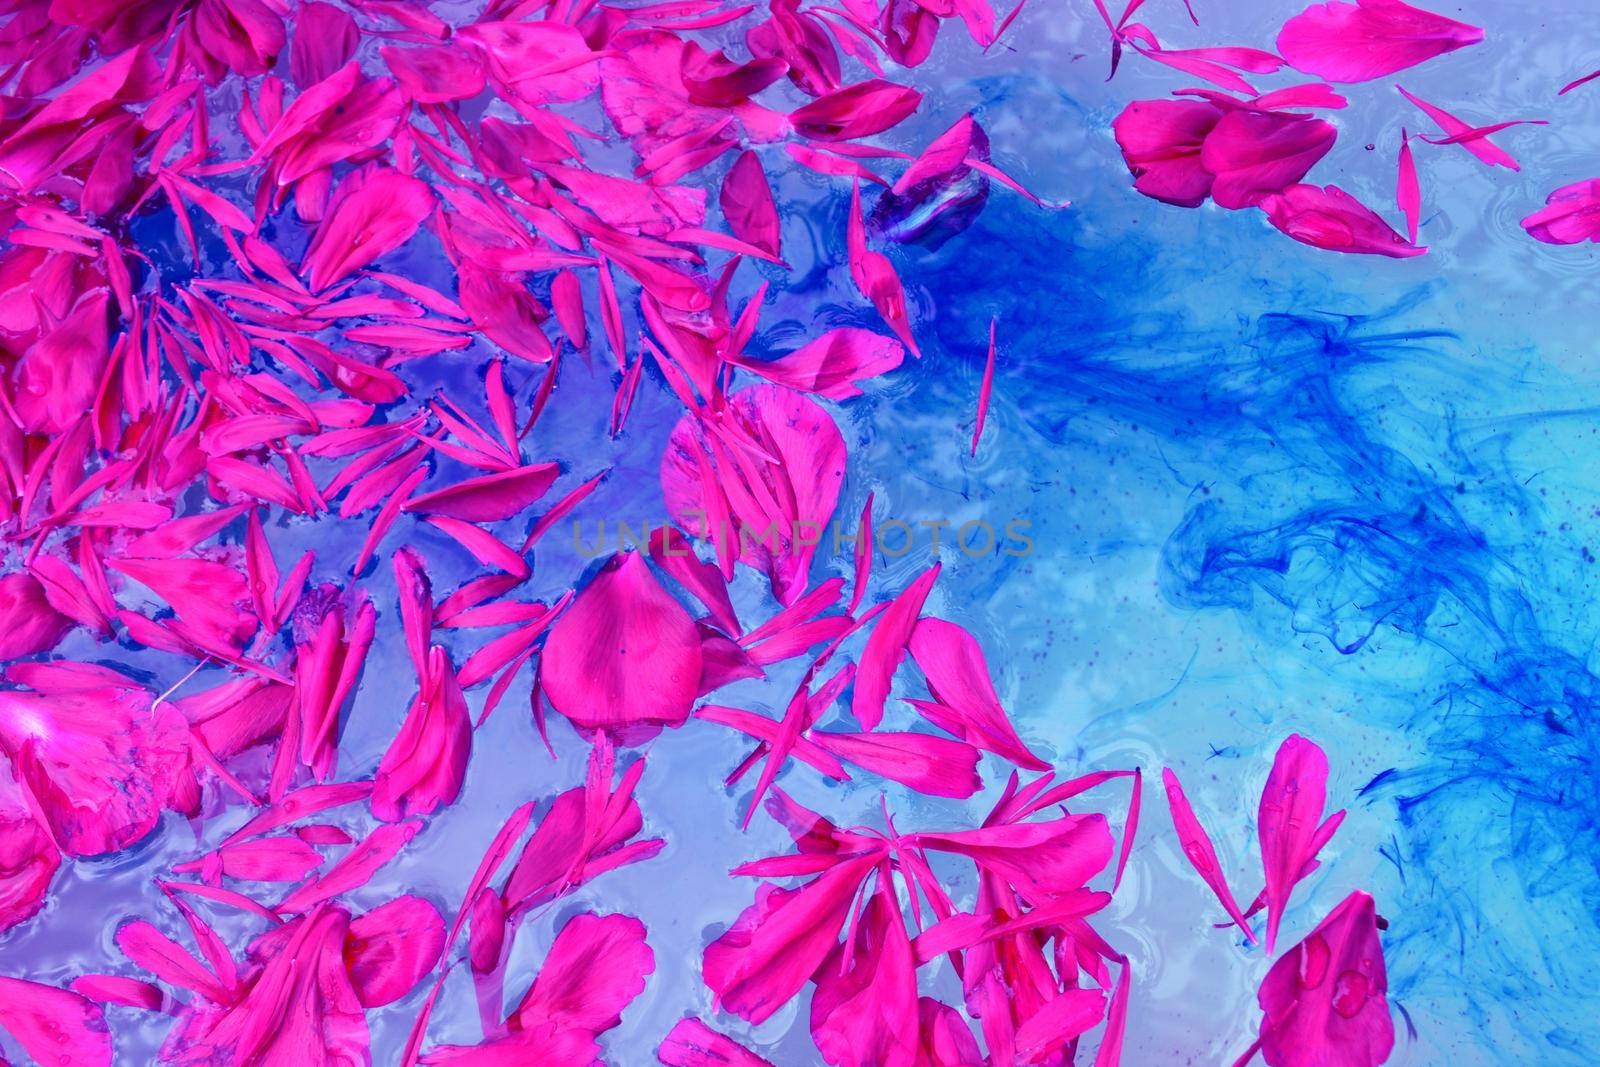 Pink petals floating on blue water by hibrida13